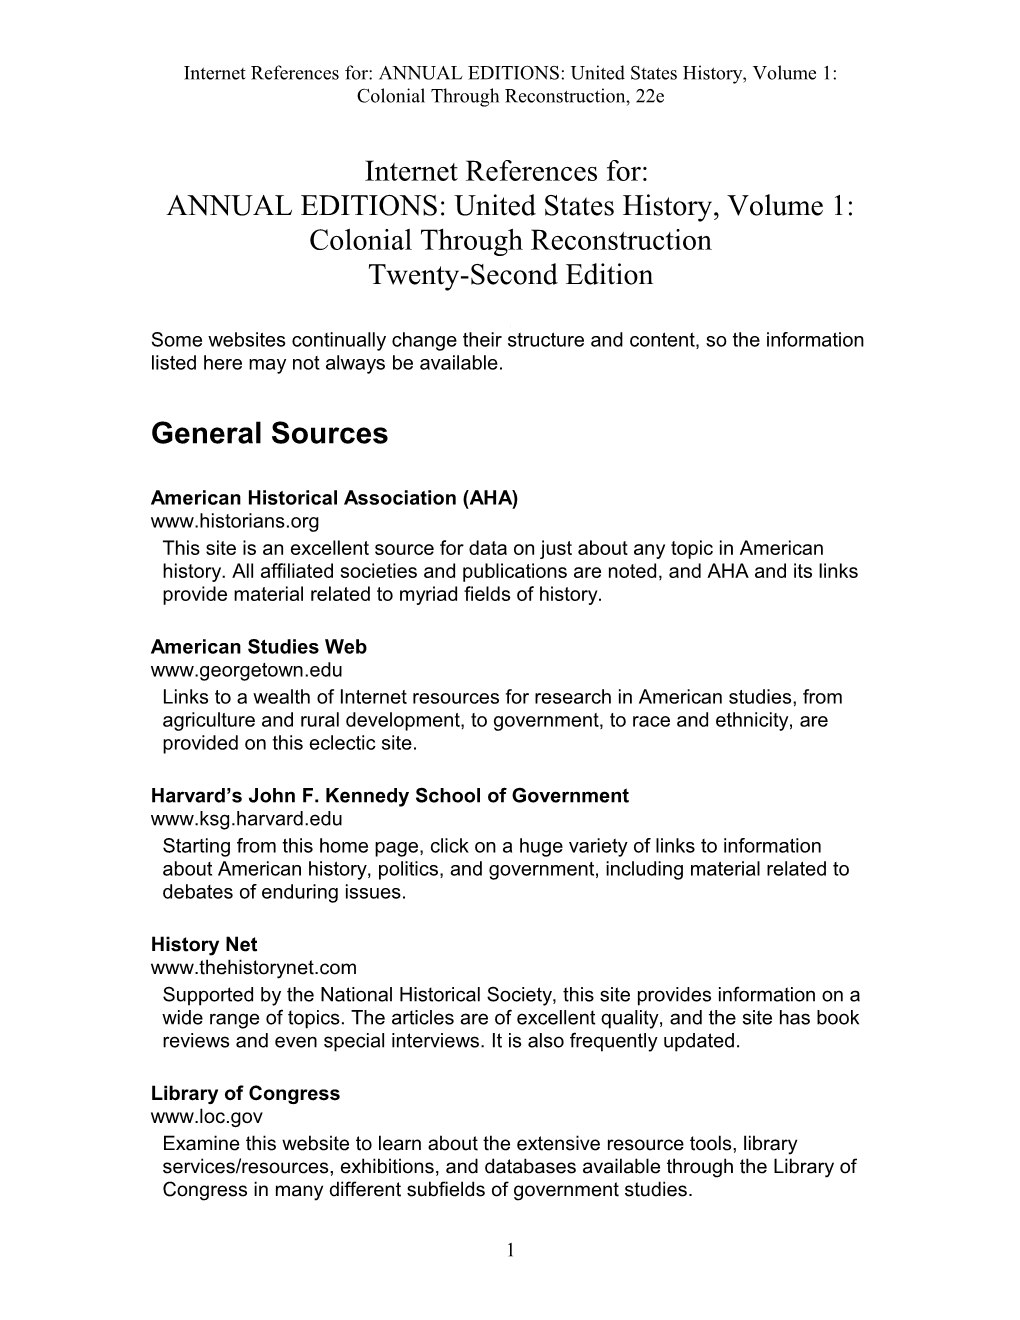 ANNUAL EDITIONS: United States History, Volume 1: Colonial Through Reconstruction